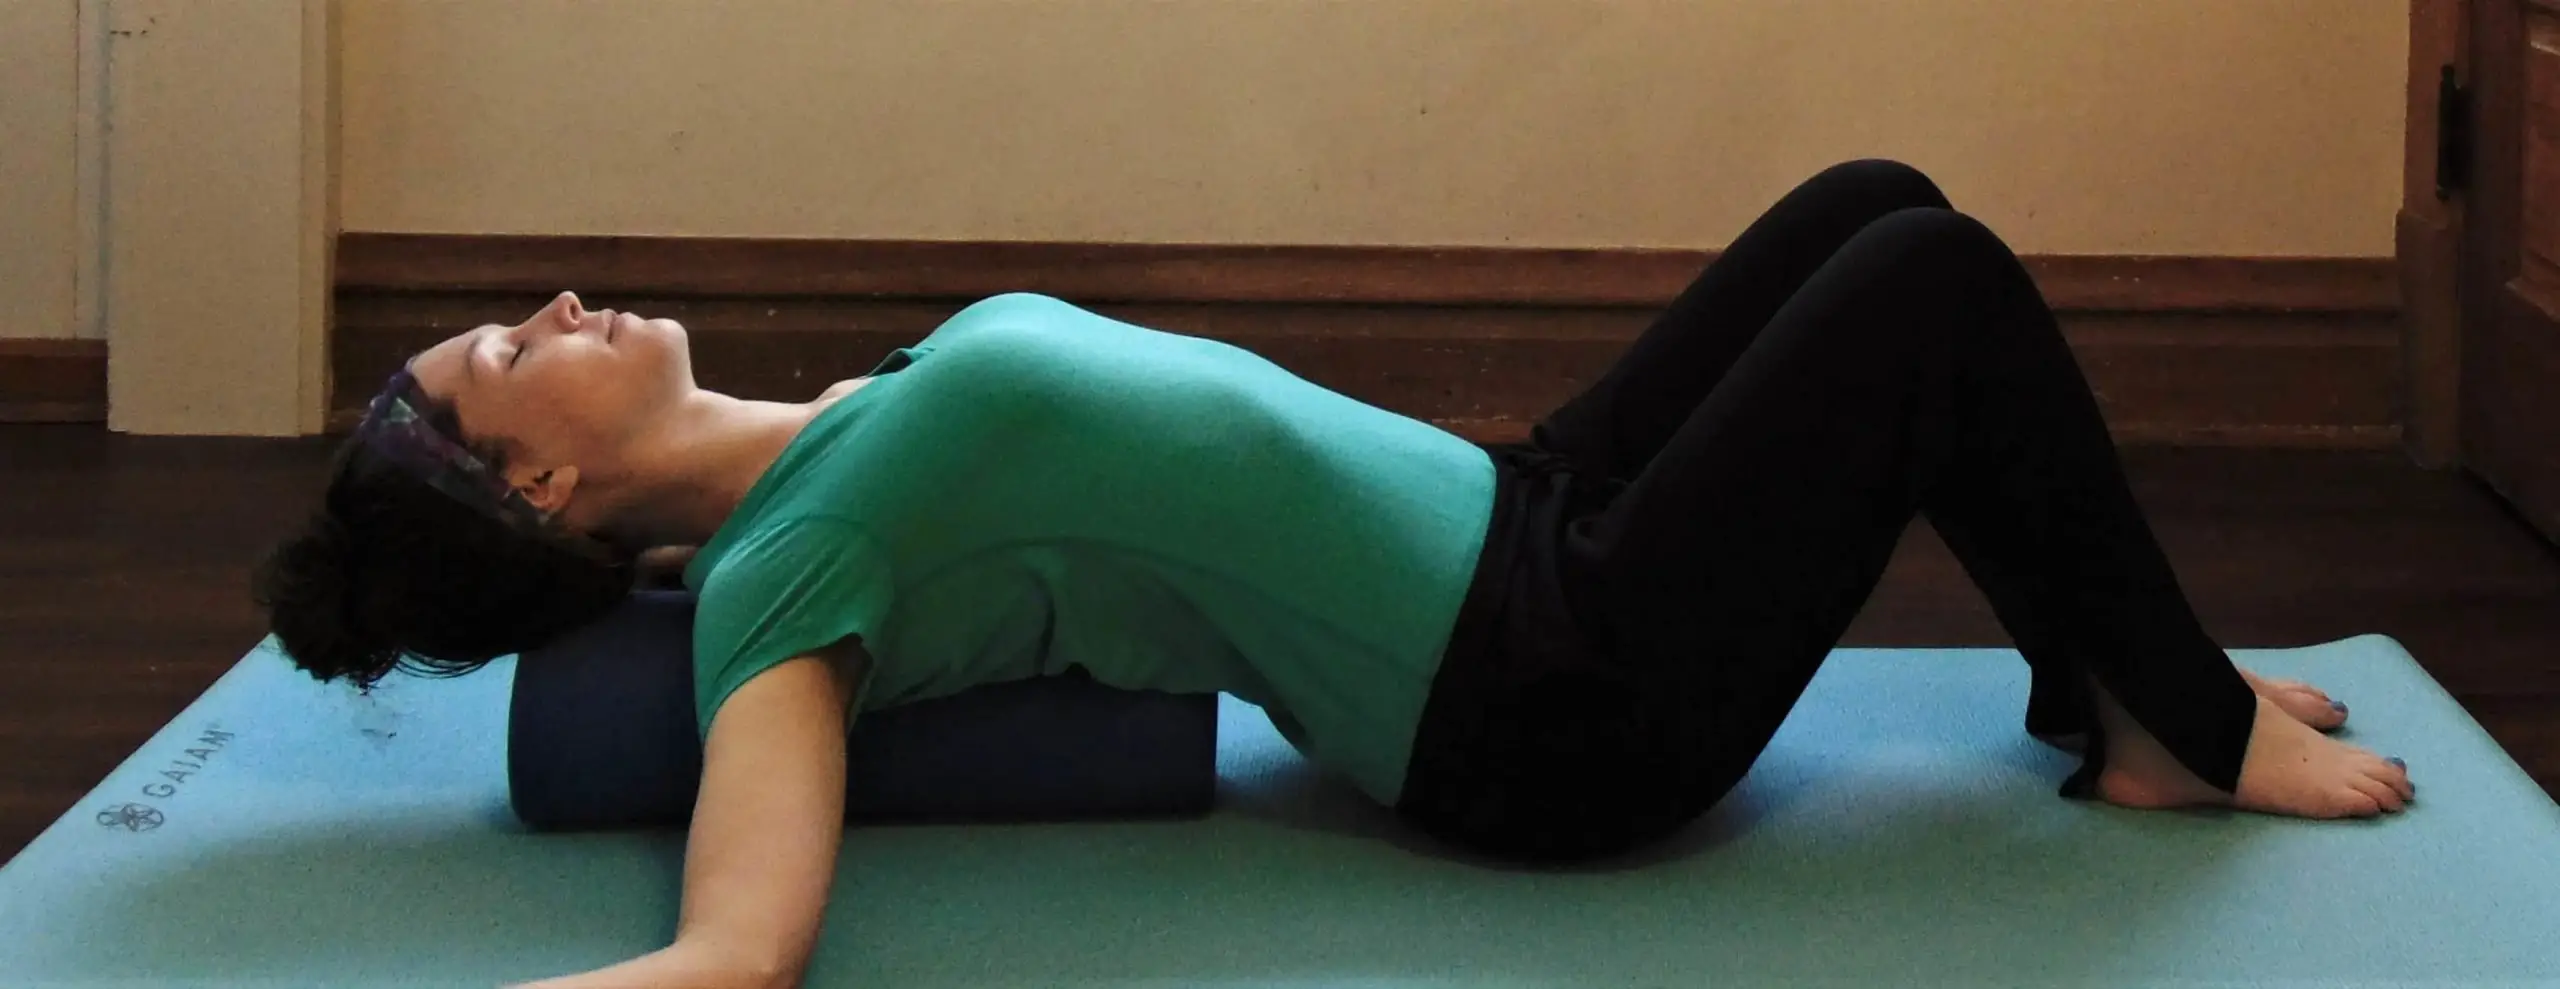 How to Use a Foam Roller to Relieve Back Pain